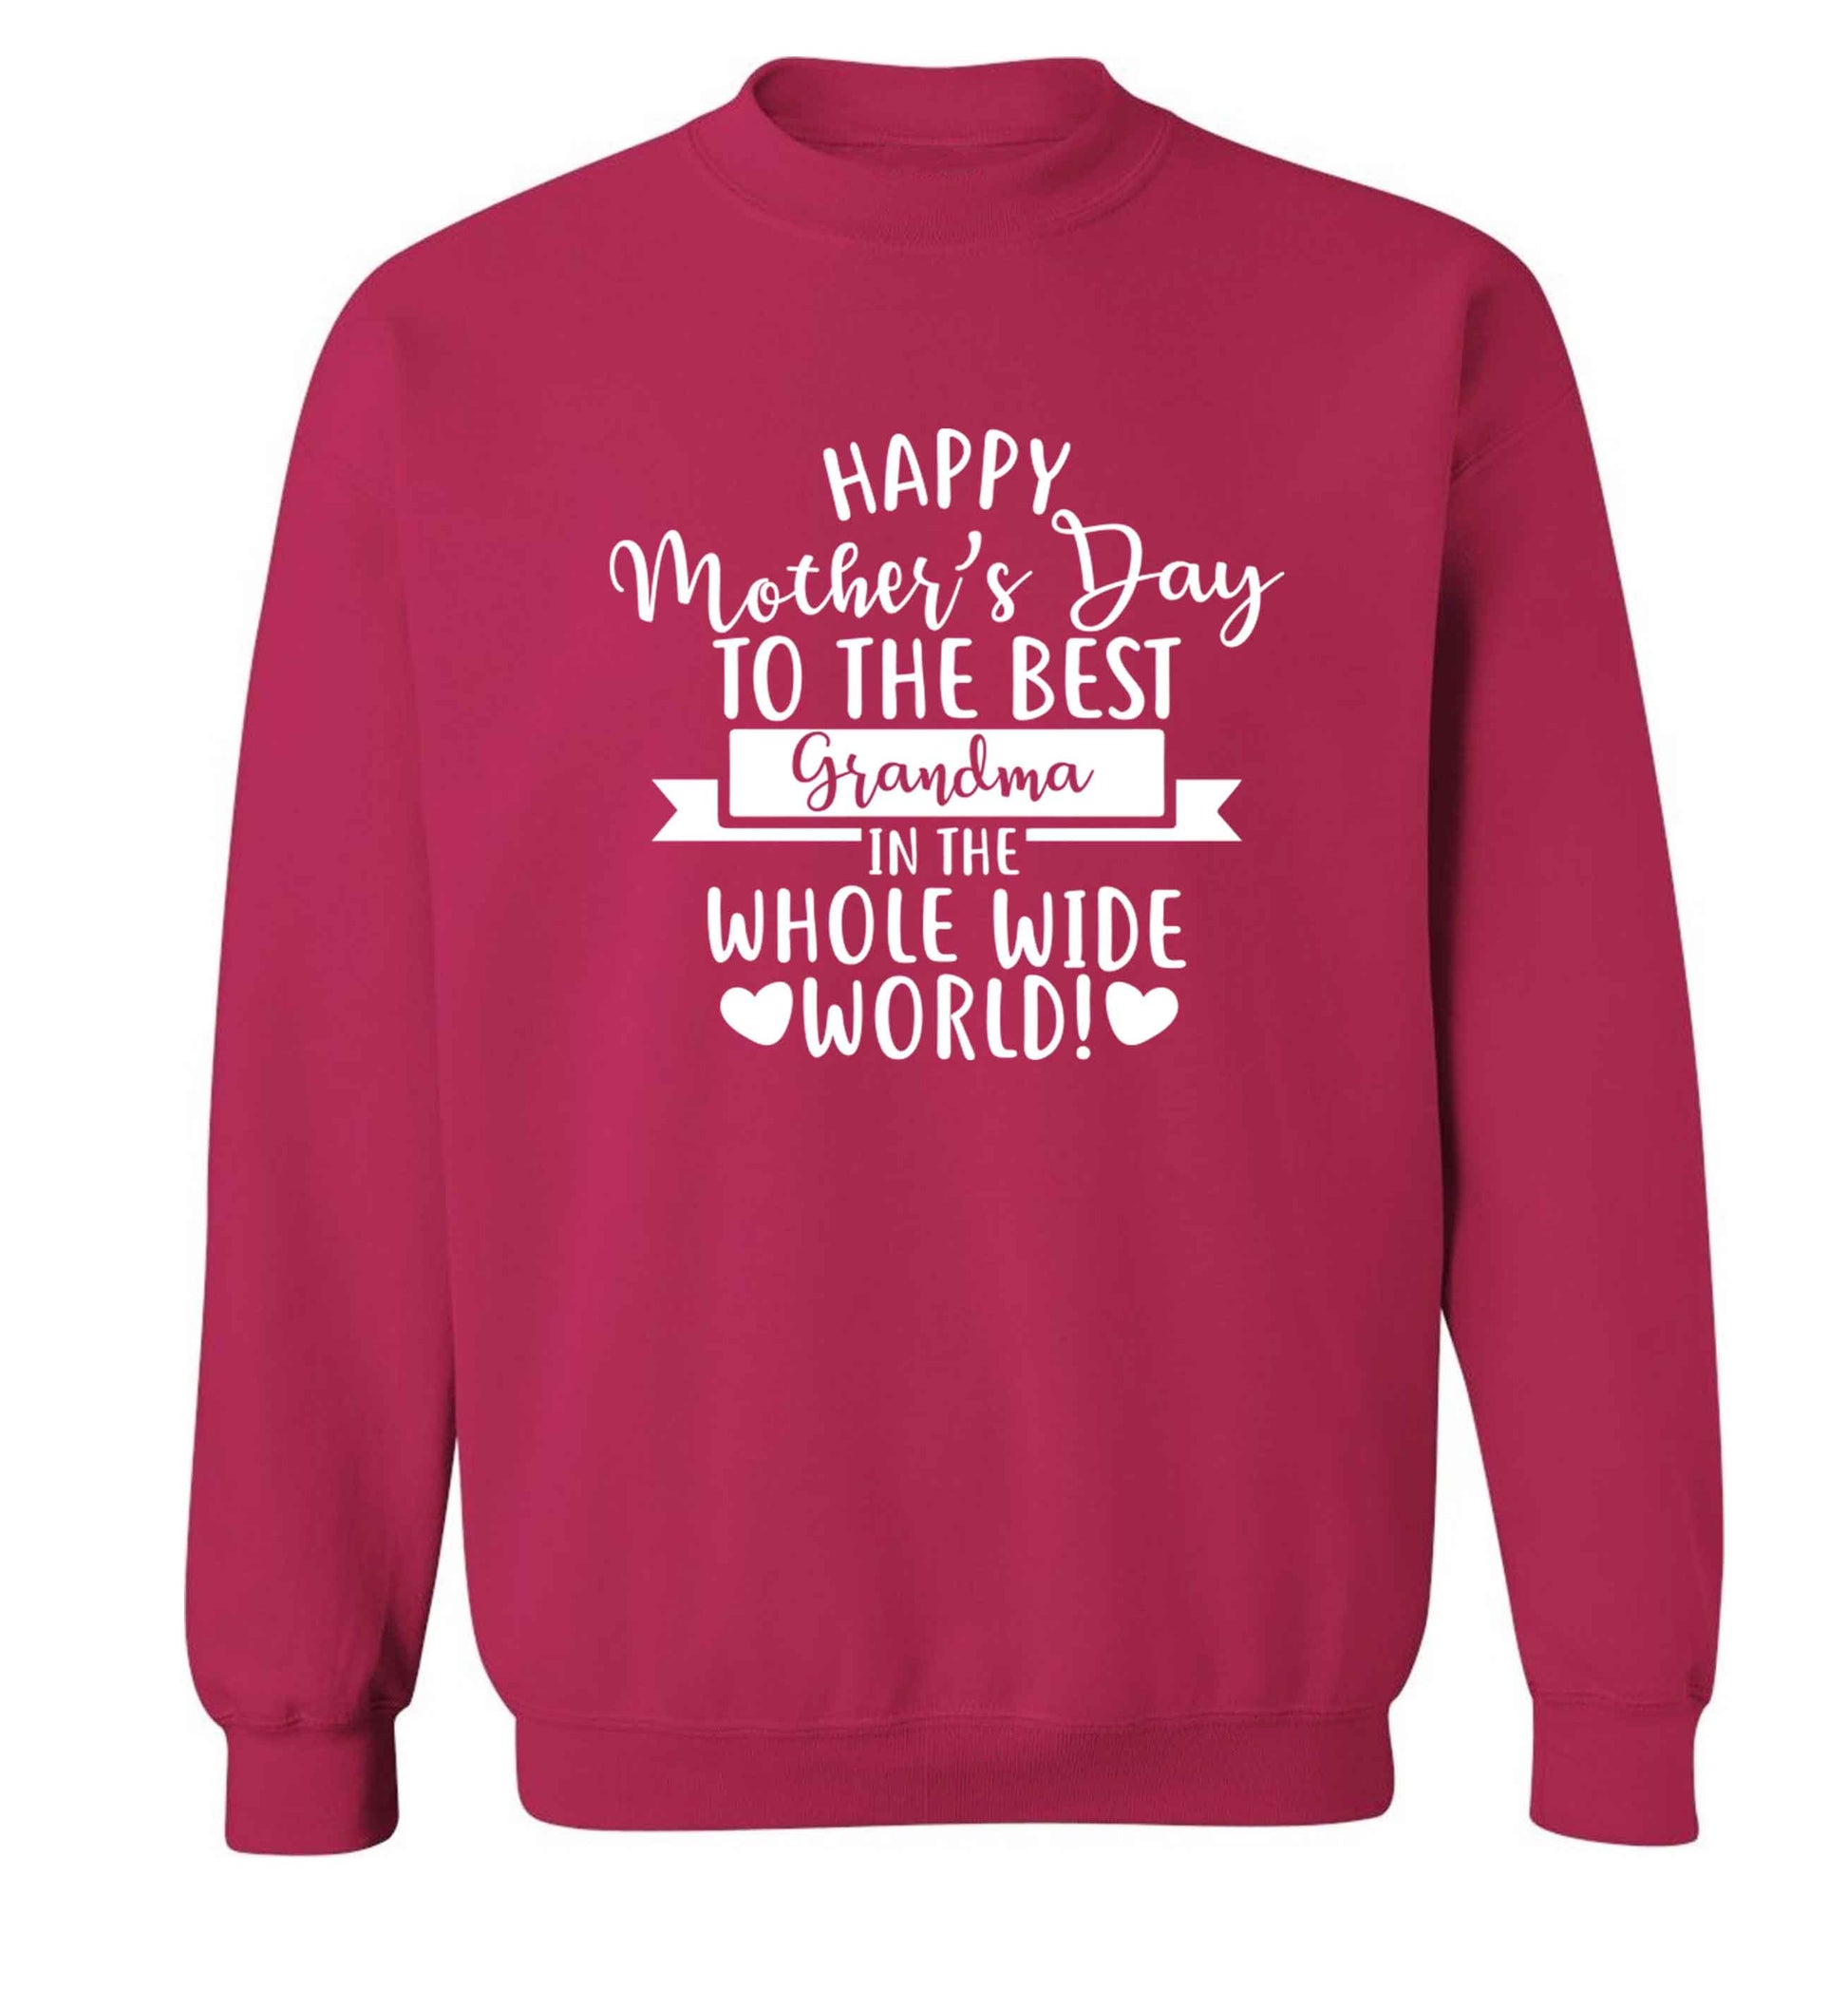 Happy mother's day to the best grandma in the world adult's unisex pink sweater 2XL